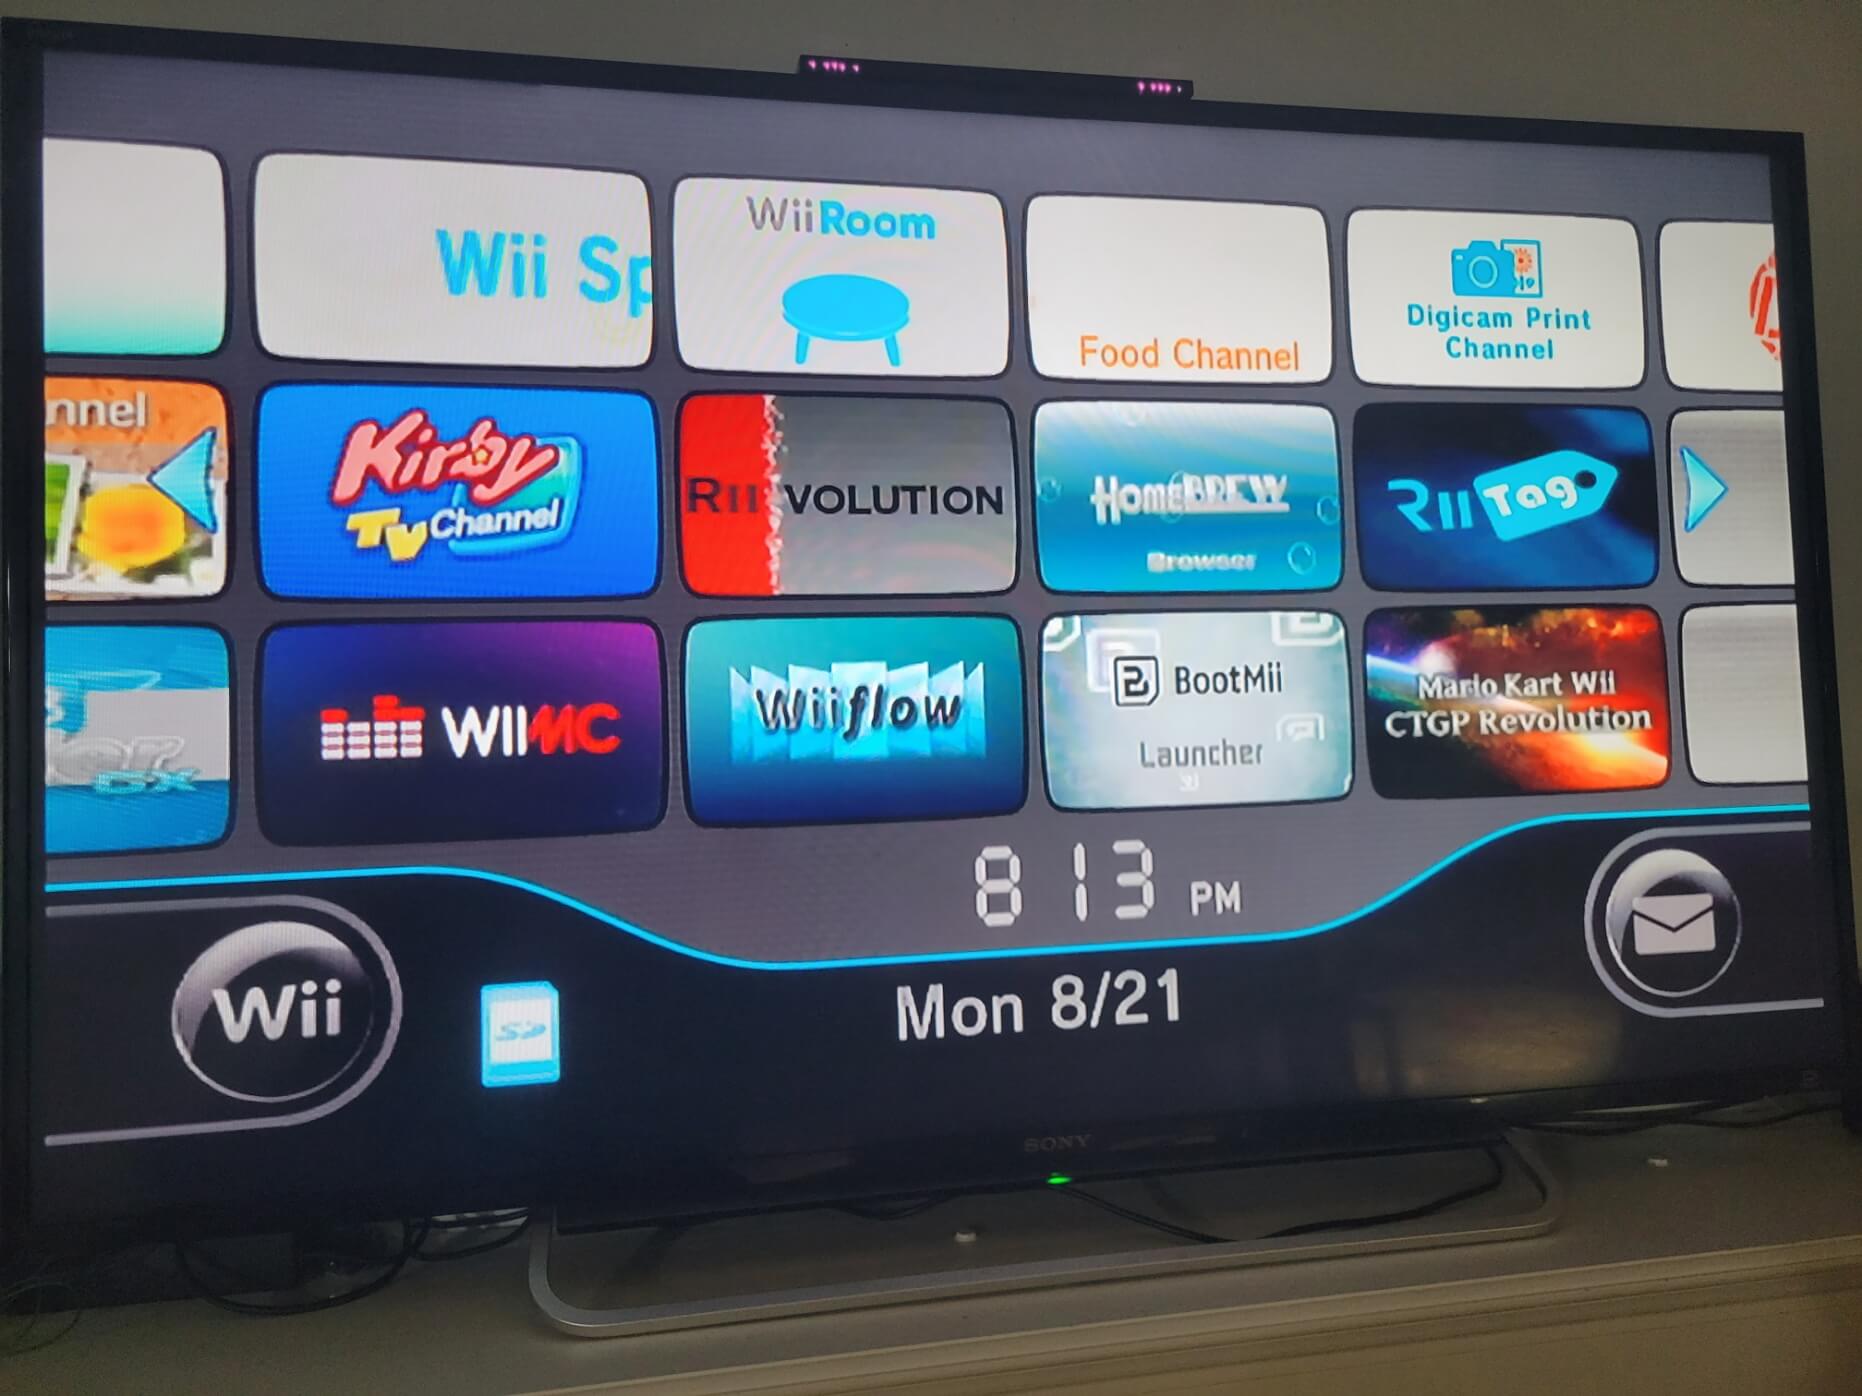 Other page of Wii menu